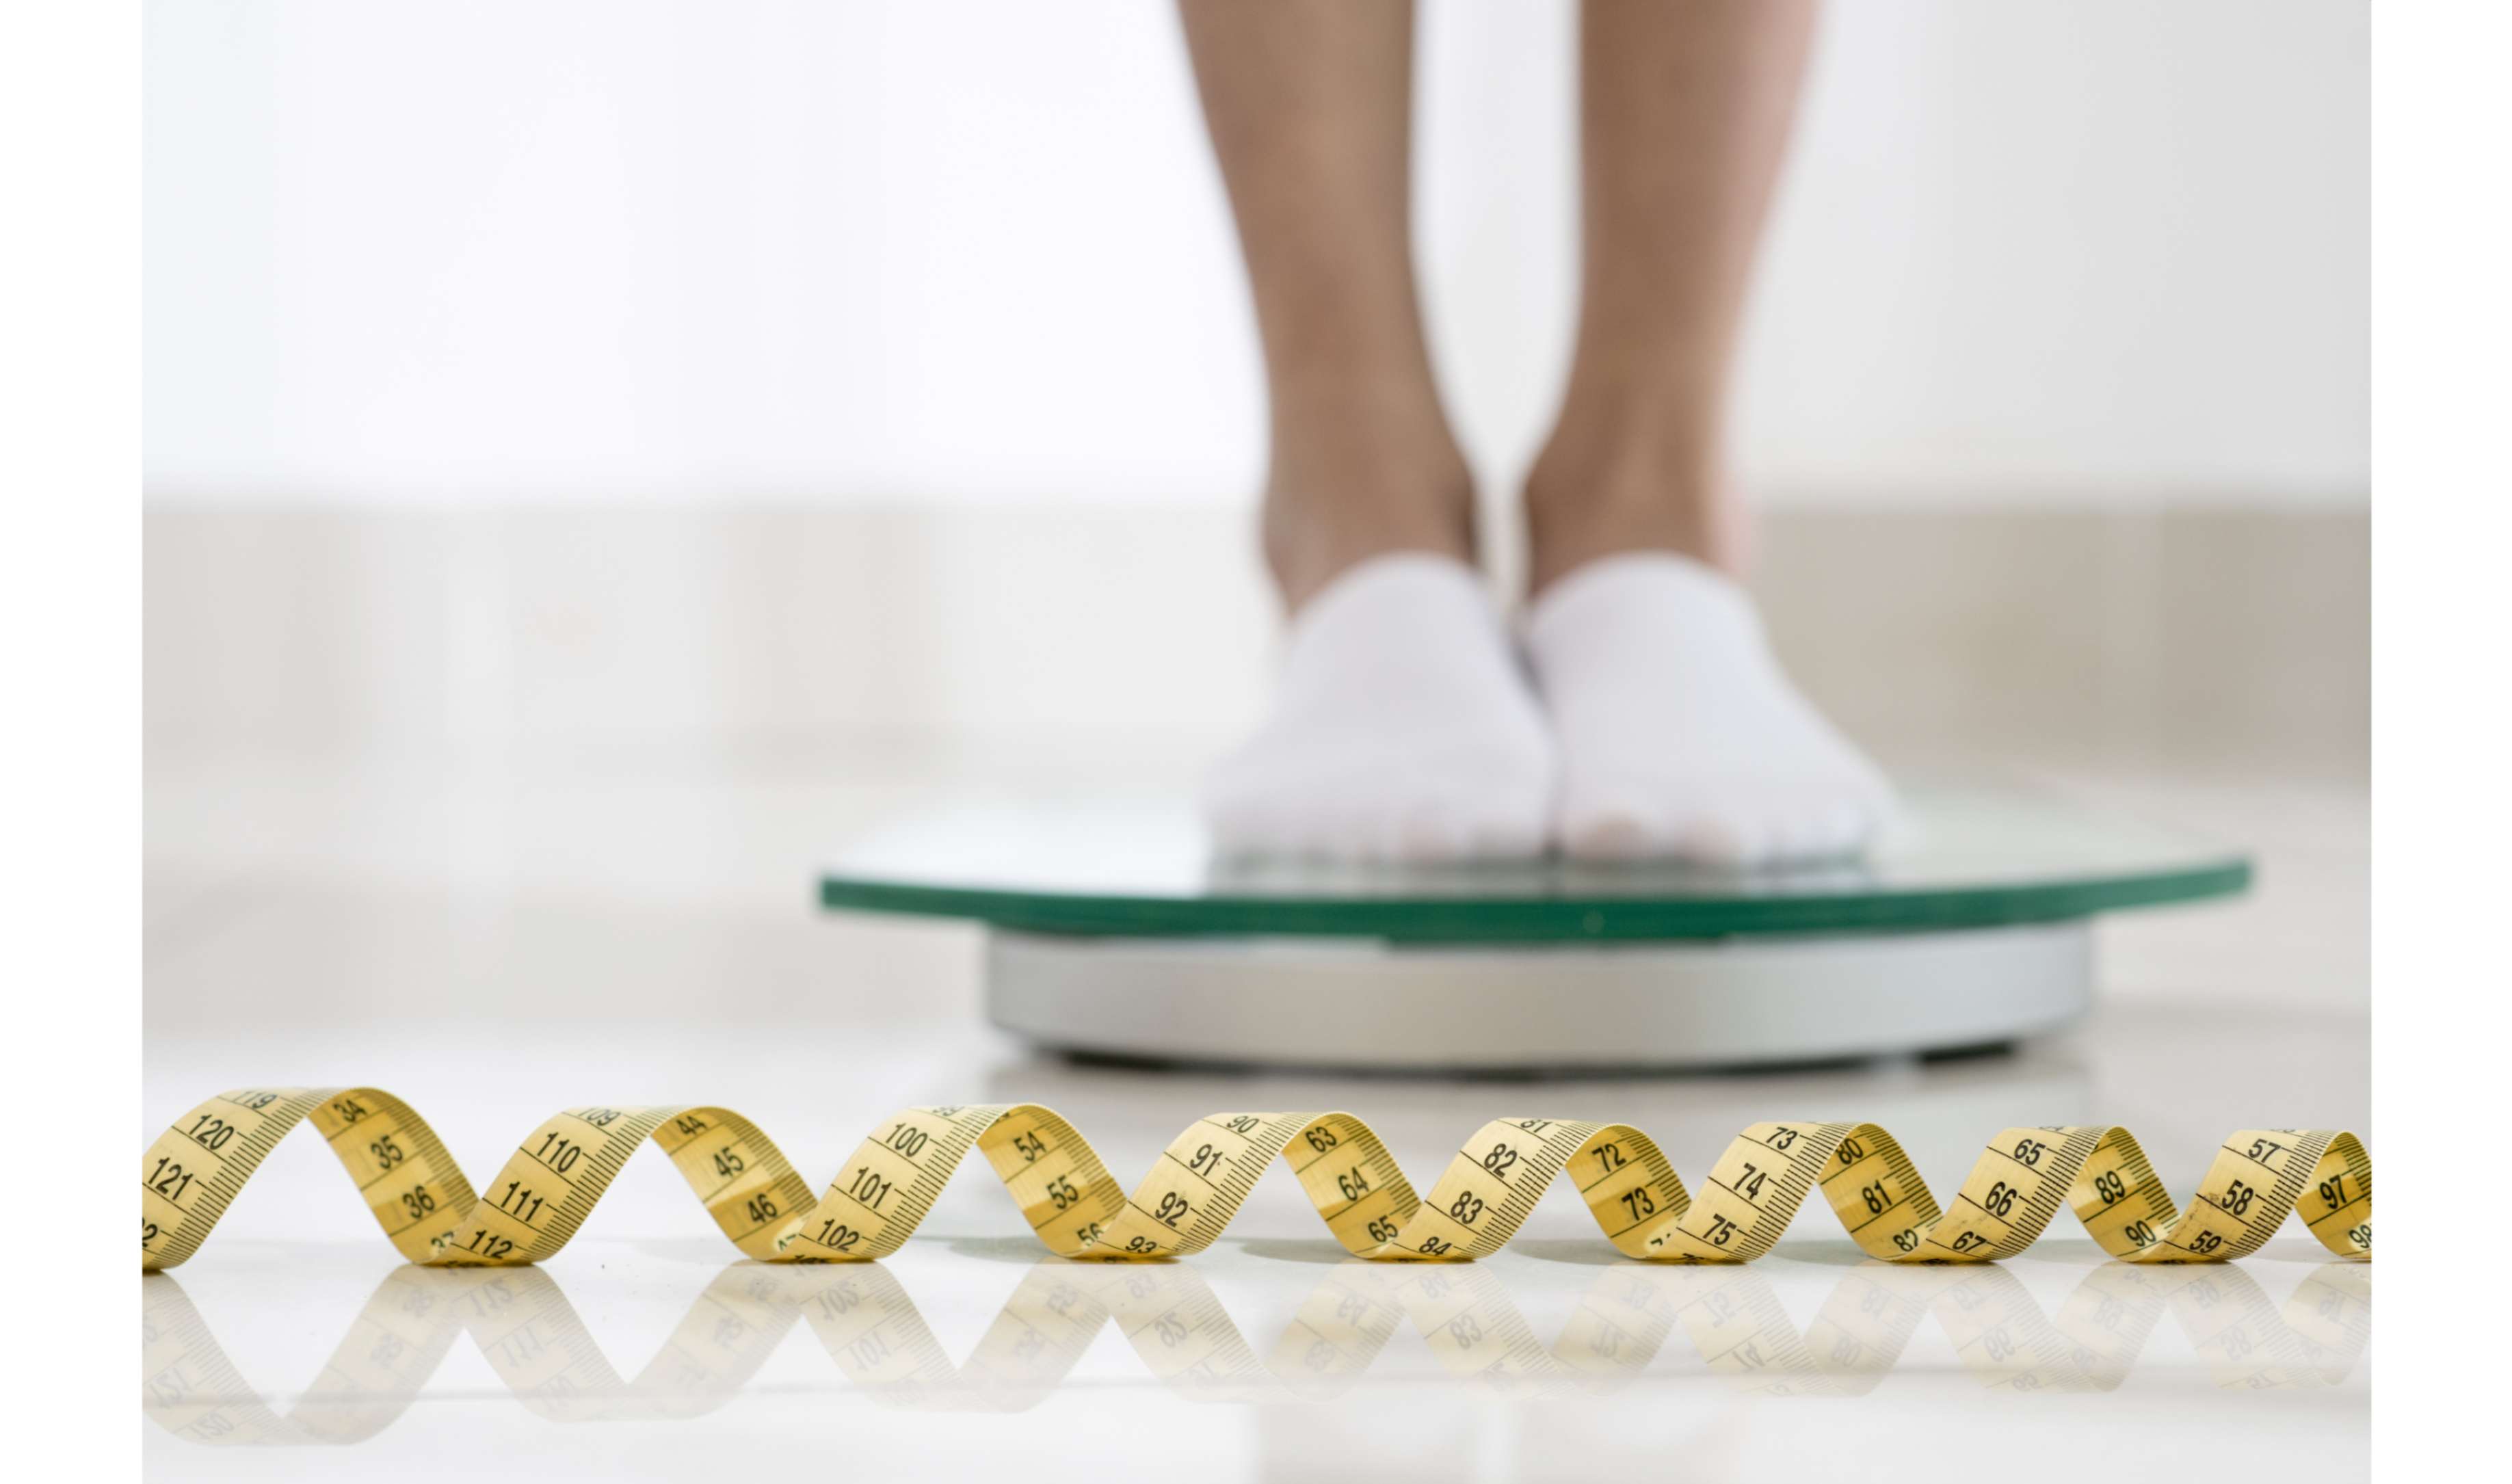 Why Losing Weight Gets Tougher With Age